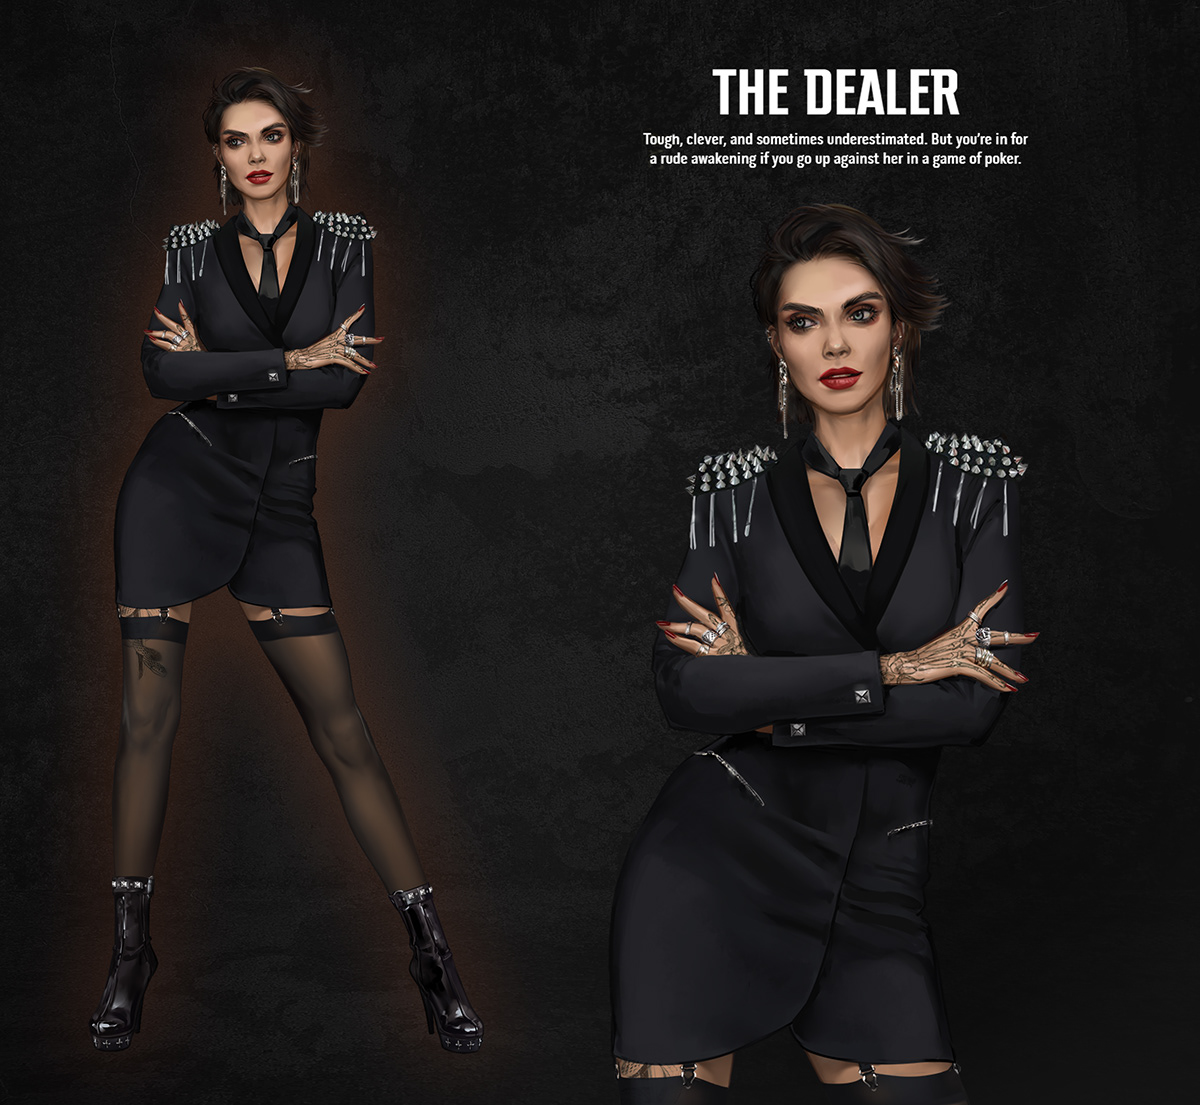 Casino Online character concept Character design  characters concept art concept artist Digital Art  Drawing  ILLUSTRATION  rock